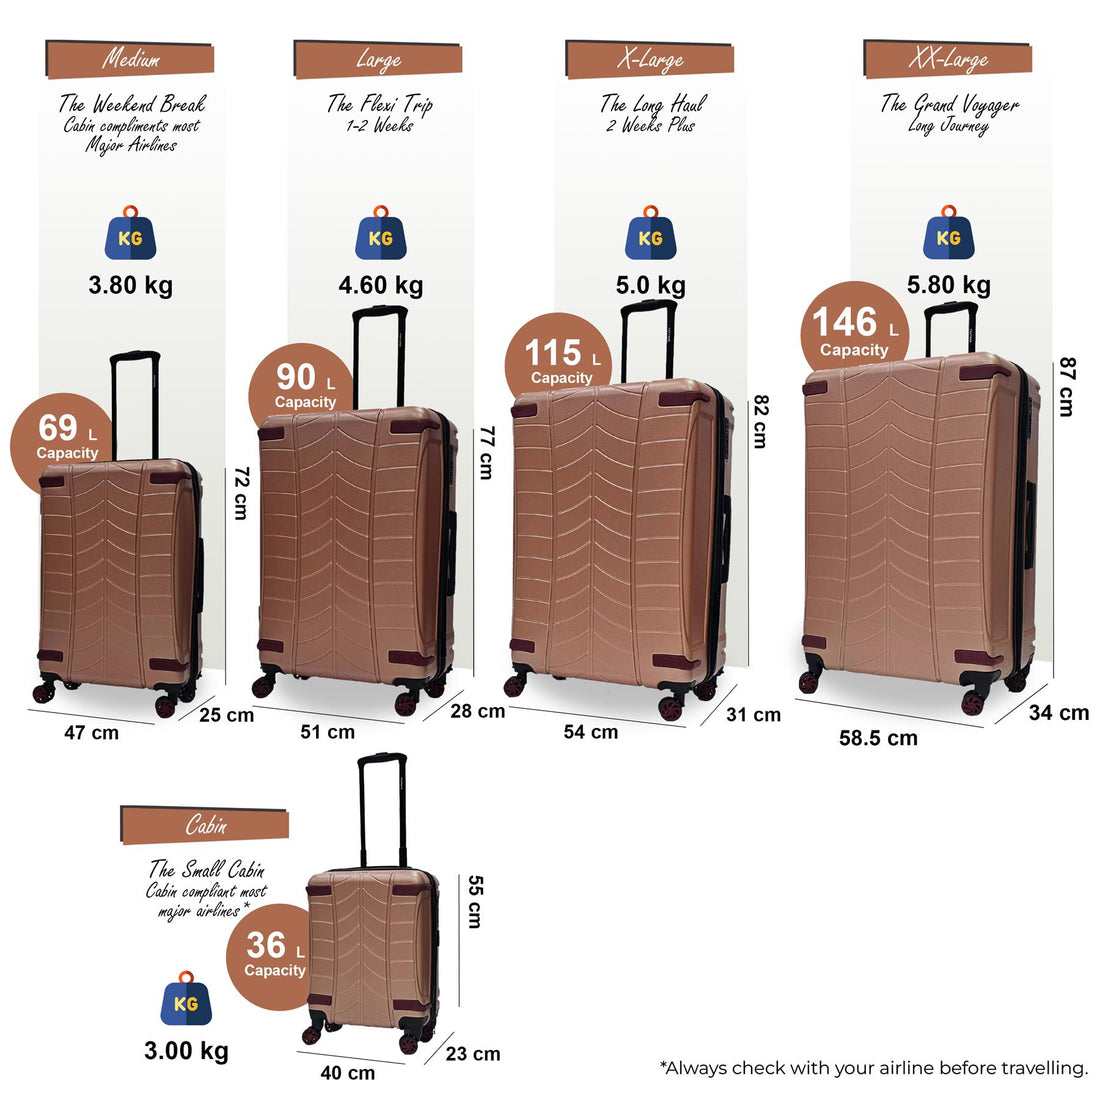 Bynum Set of 5 Hard Shell Suitcase in Rose Gold